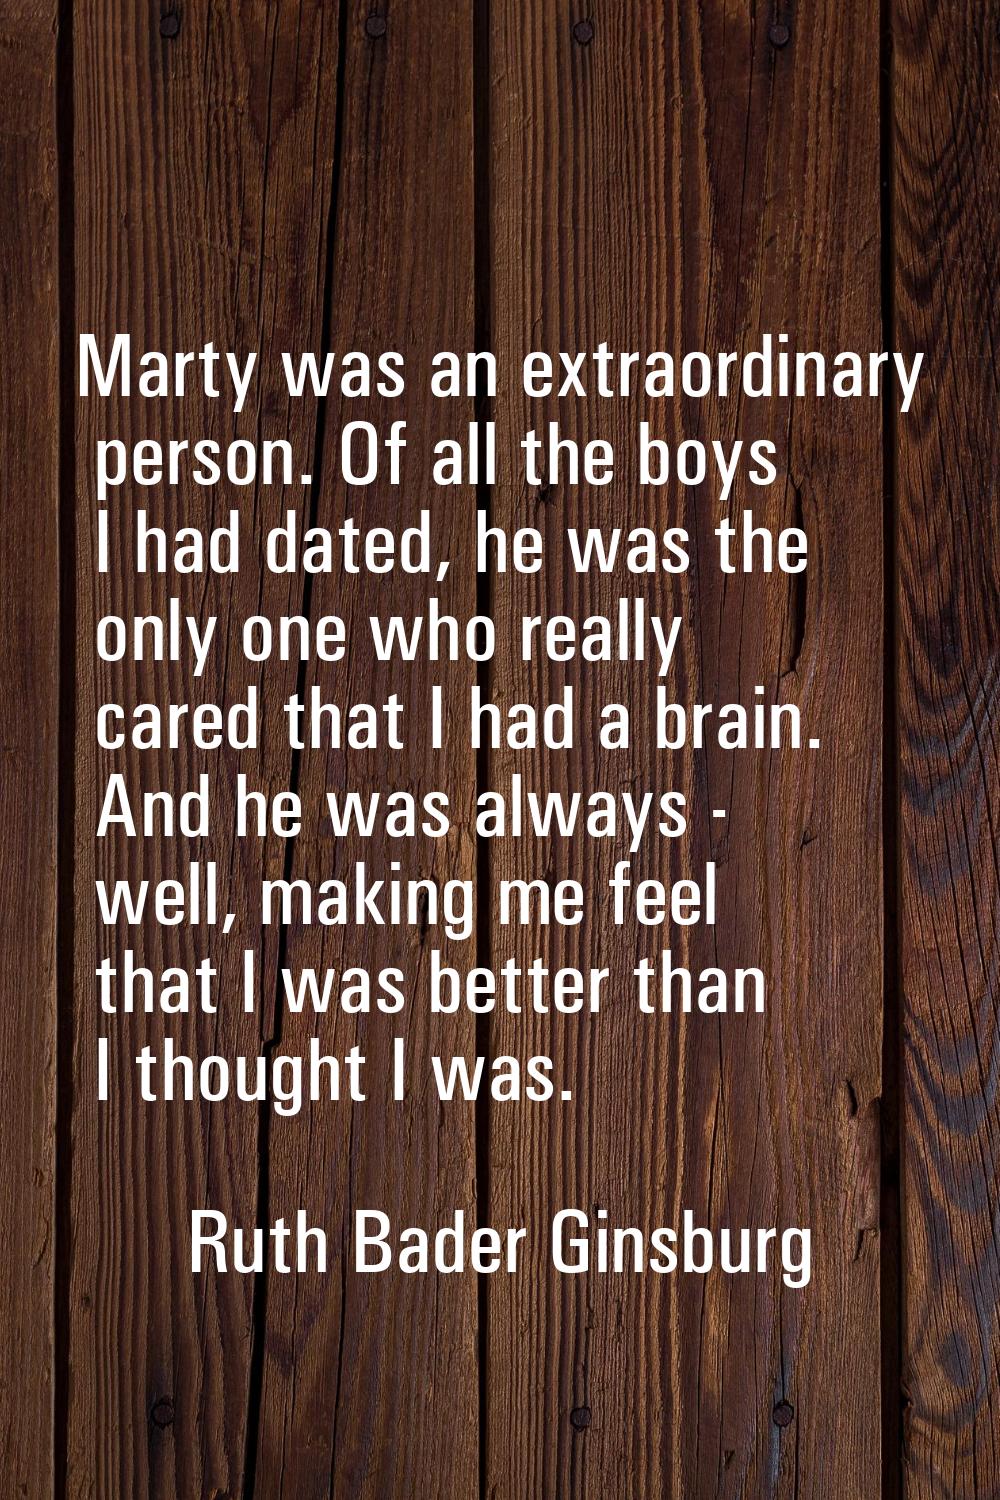 Marty was an extraordinary person. Of all the boys I had dated, he was the only one who really care